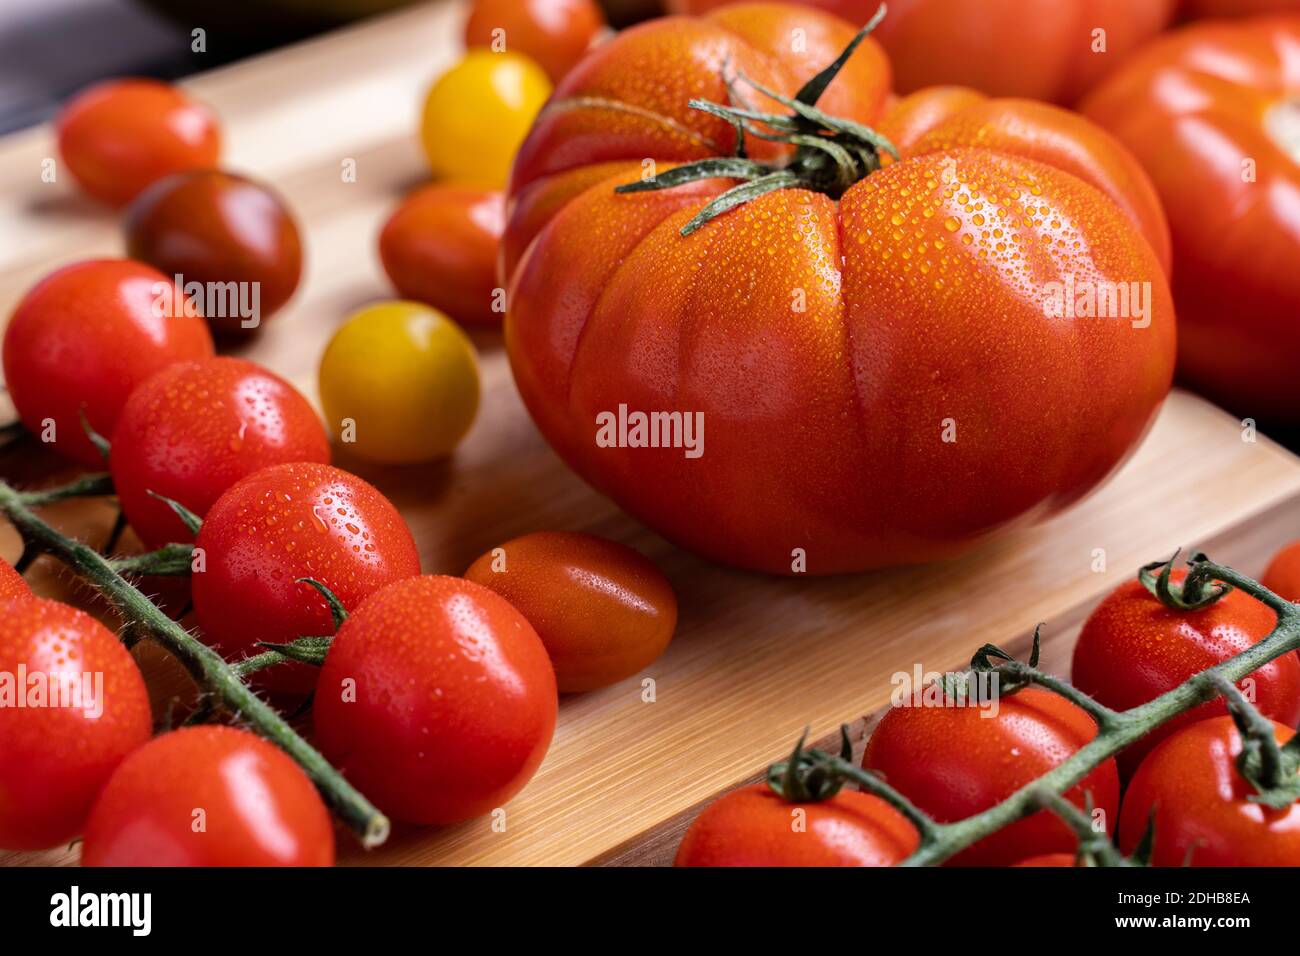 A top view of different varieties of tomatoes Stock Photo